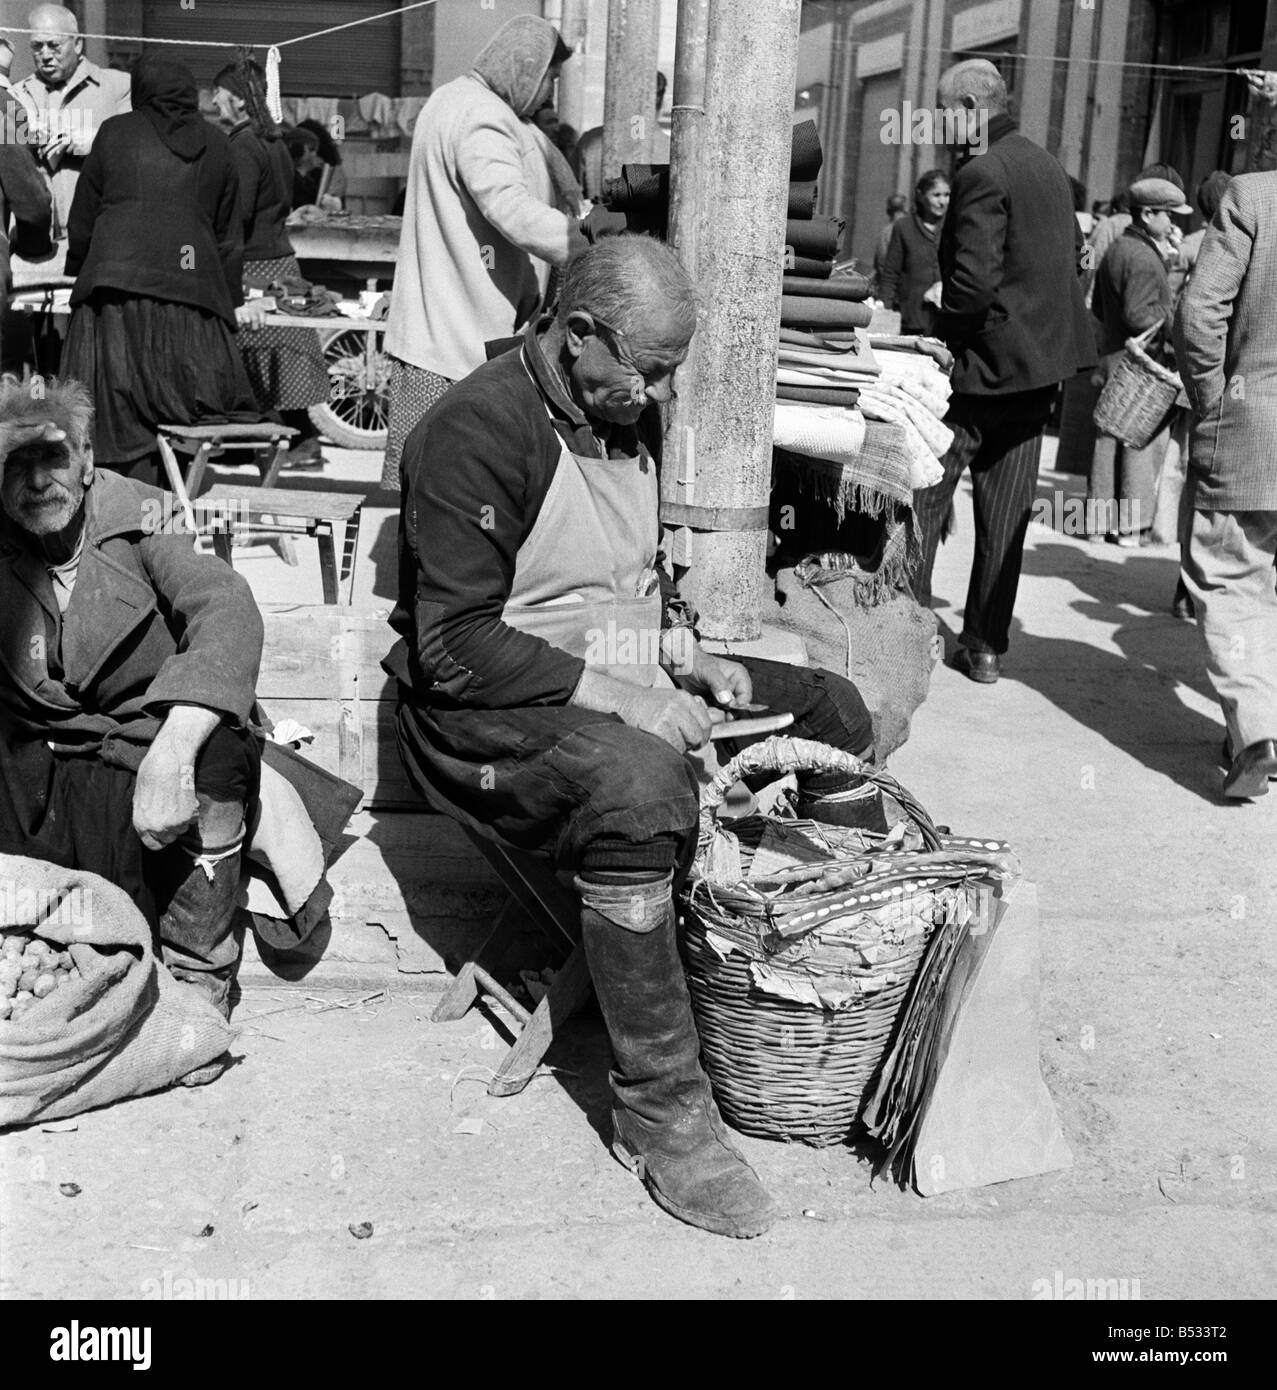 Traders at the Ladies Bazaar which opens every Friday in Nicosia, Cyprus,. The market sells items as diverse as lace, silk, embroideries, fruit and food. November 1952 C1105-006 Stock Photo